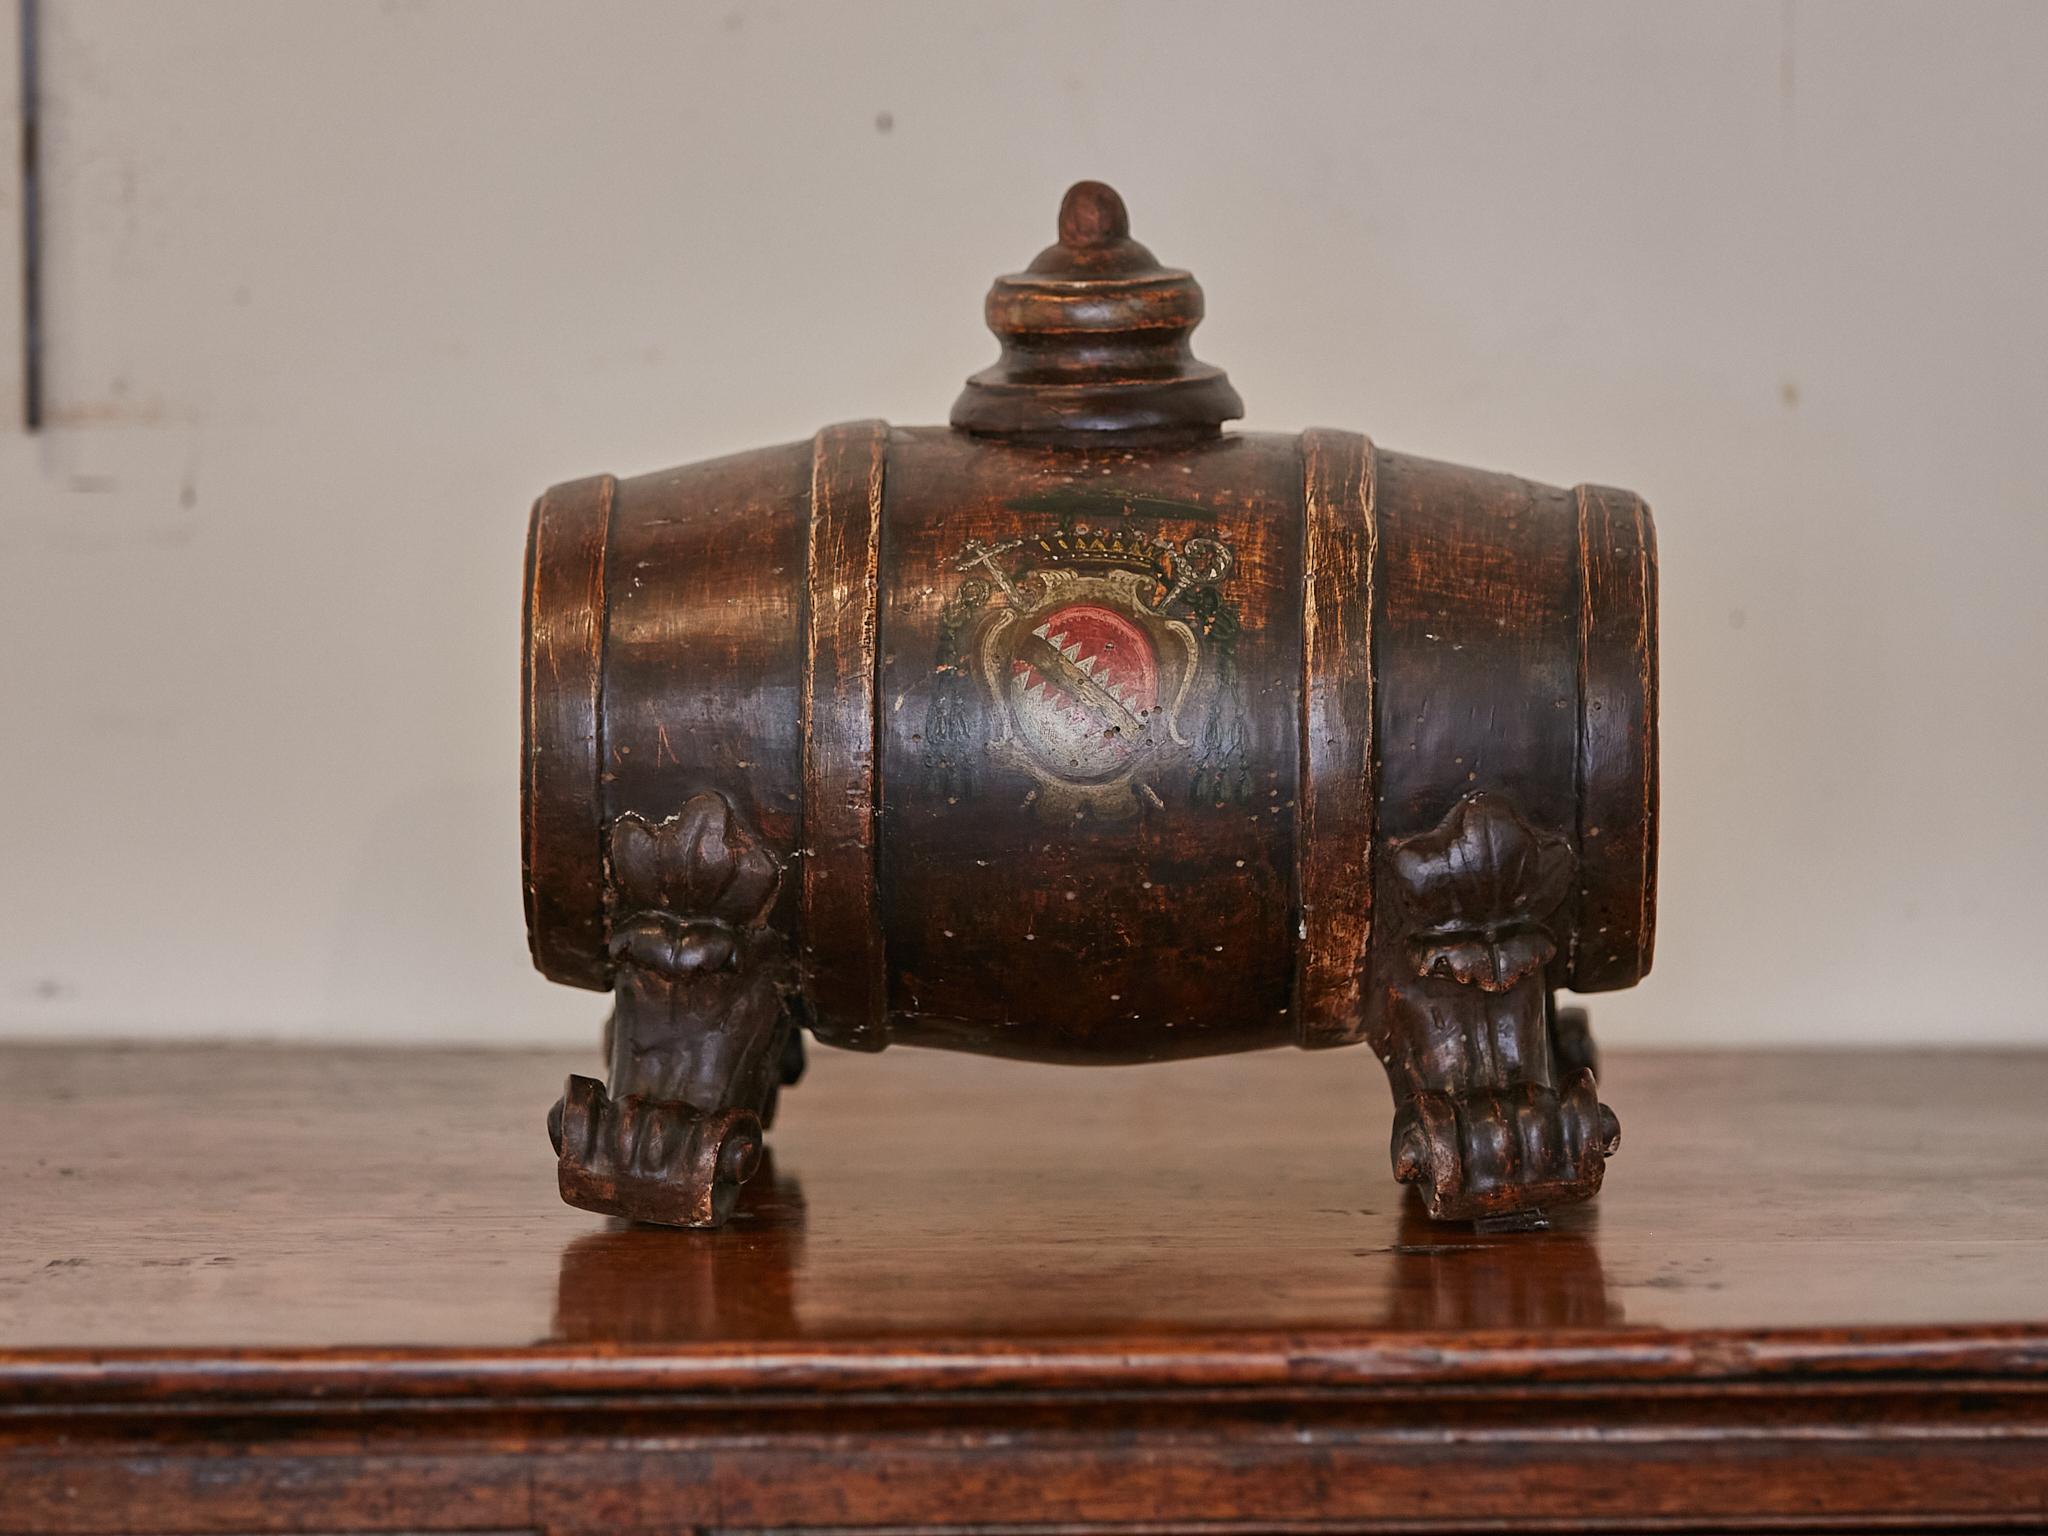 A small Italian wooden spirit barrel from the 19th century (or earlier) with carved scrolling feet, painted heralding shield on the belly and nice patina. Immerse yourself in the rich history of Italy with this wooden spirit barrel, a cherished